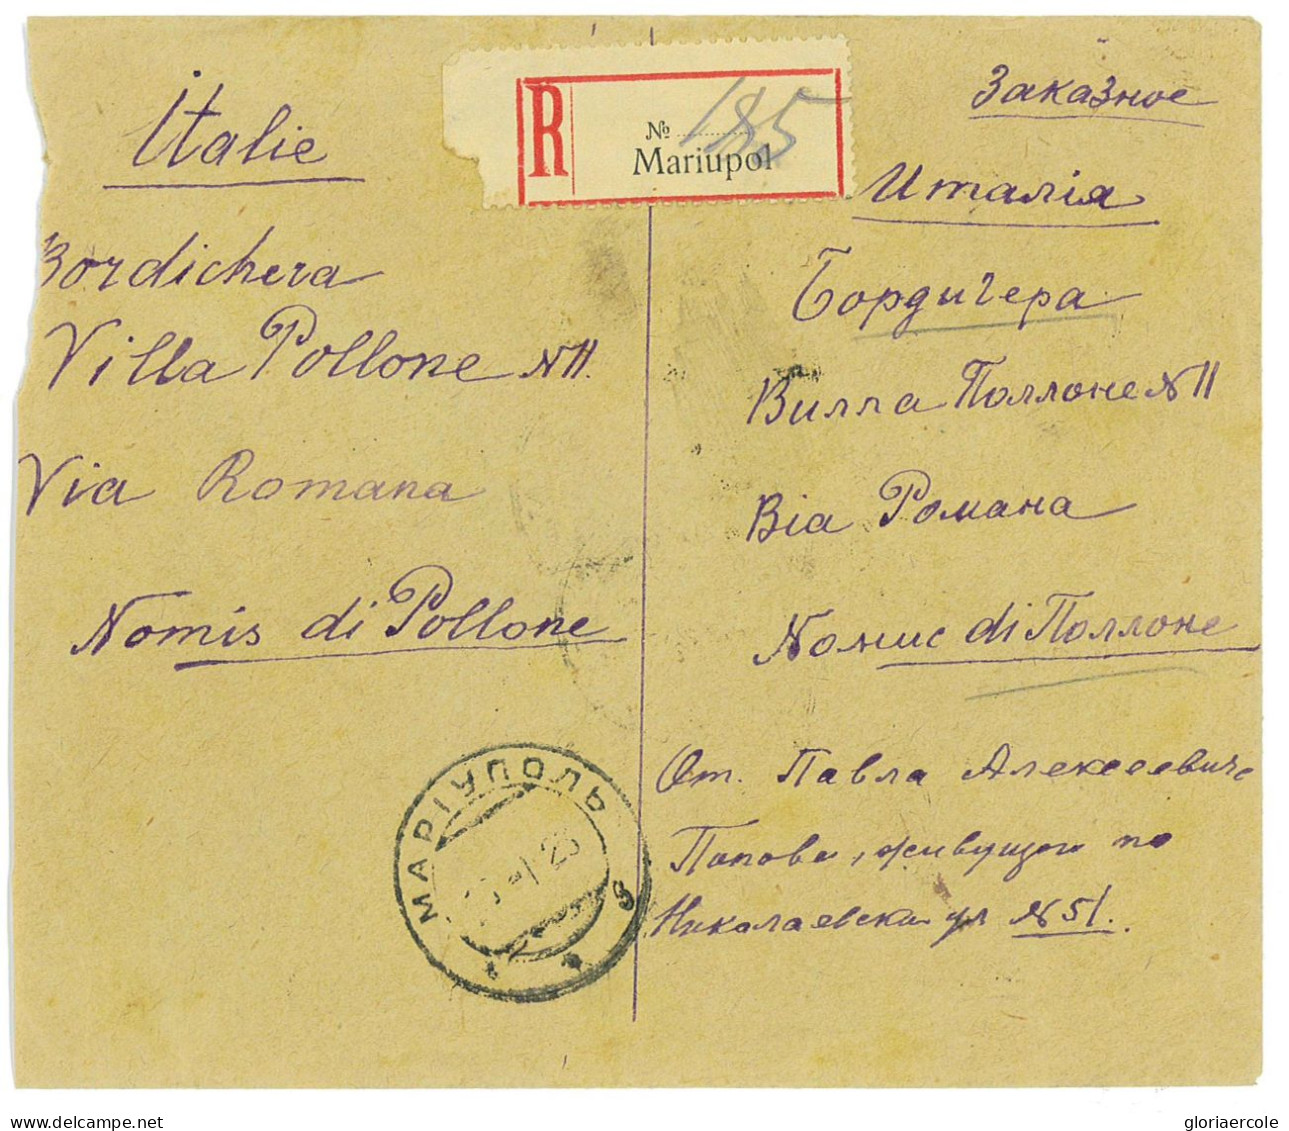 P2912 - RUSSIA , 700 RUBEL LETTER REGISTERED FROM MARIUPOL 1923 TO ITALY - Covers & Documents